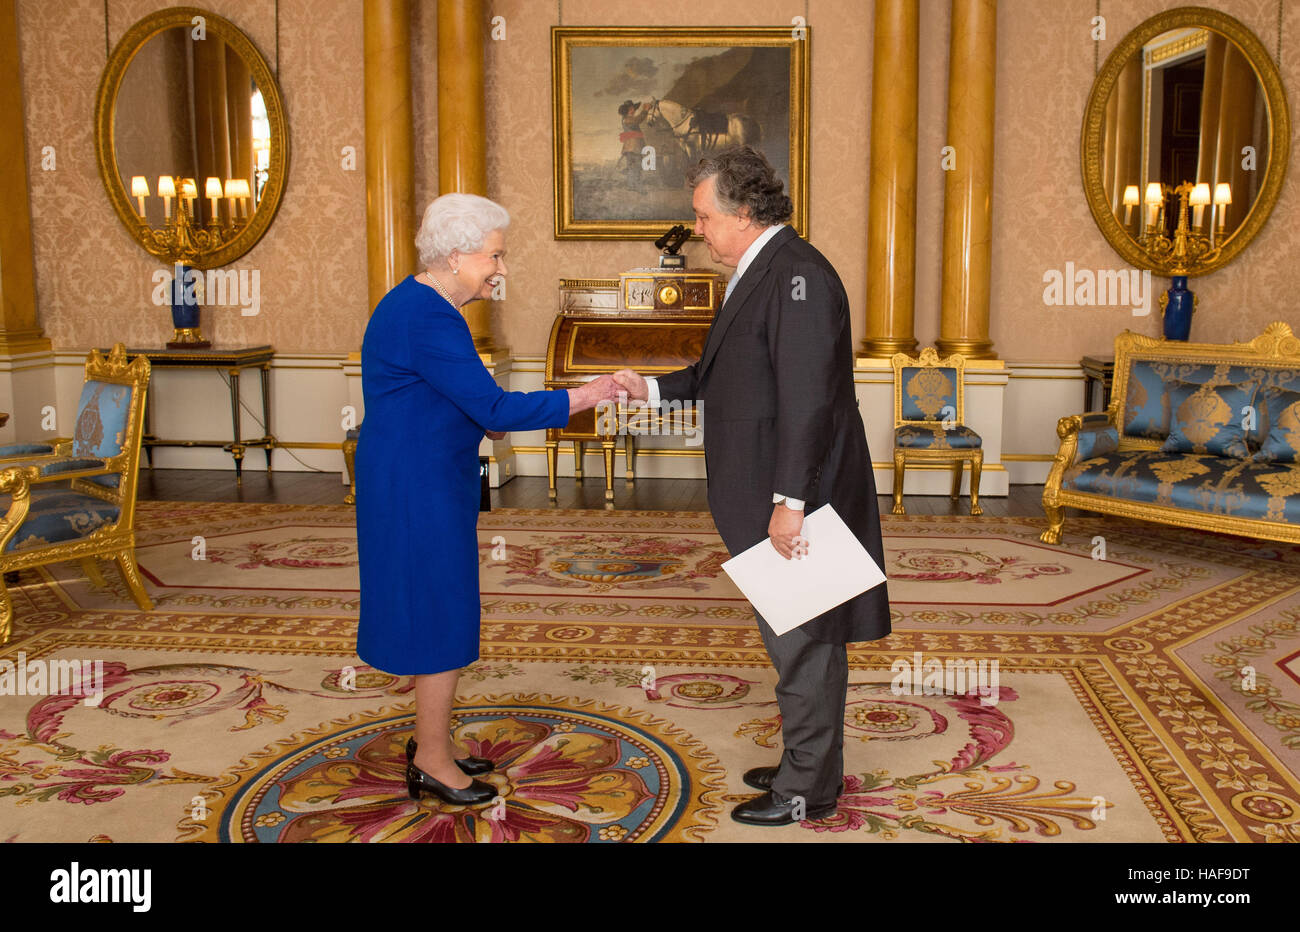 Queen Elizabeth II meets the Ambassador of Portugal Manuel Lobo Antunes during a private audience at Buckingham Palace, London. Stock Photo